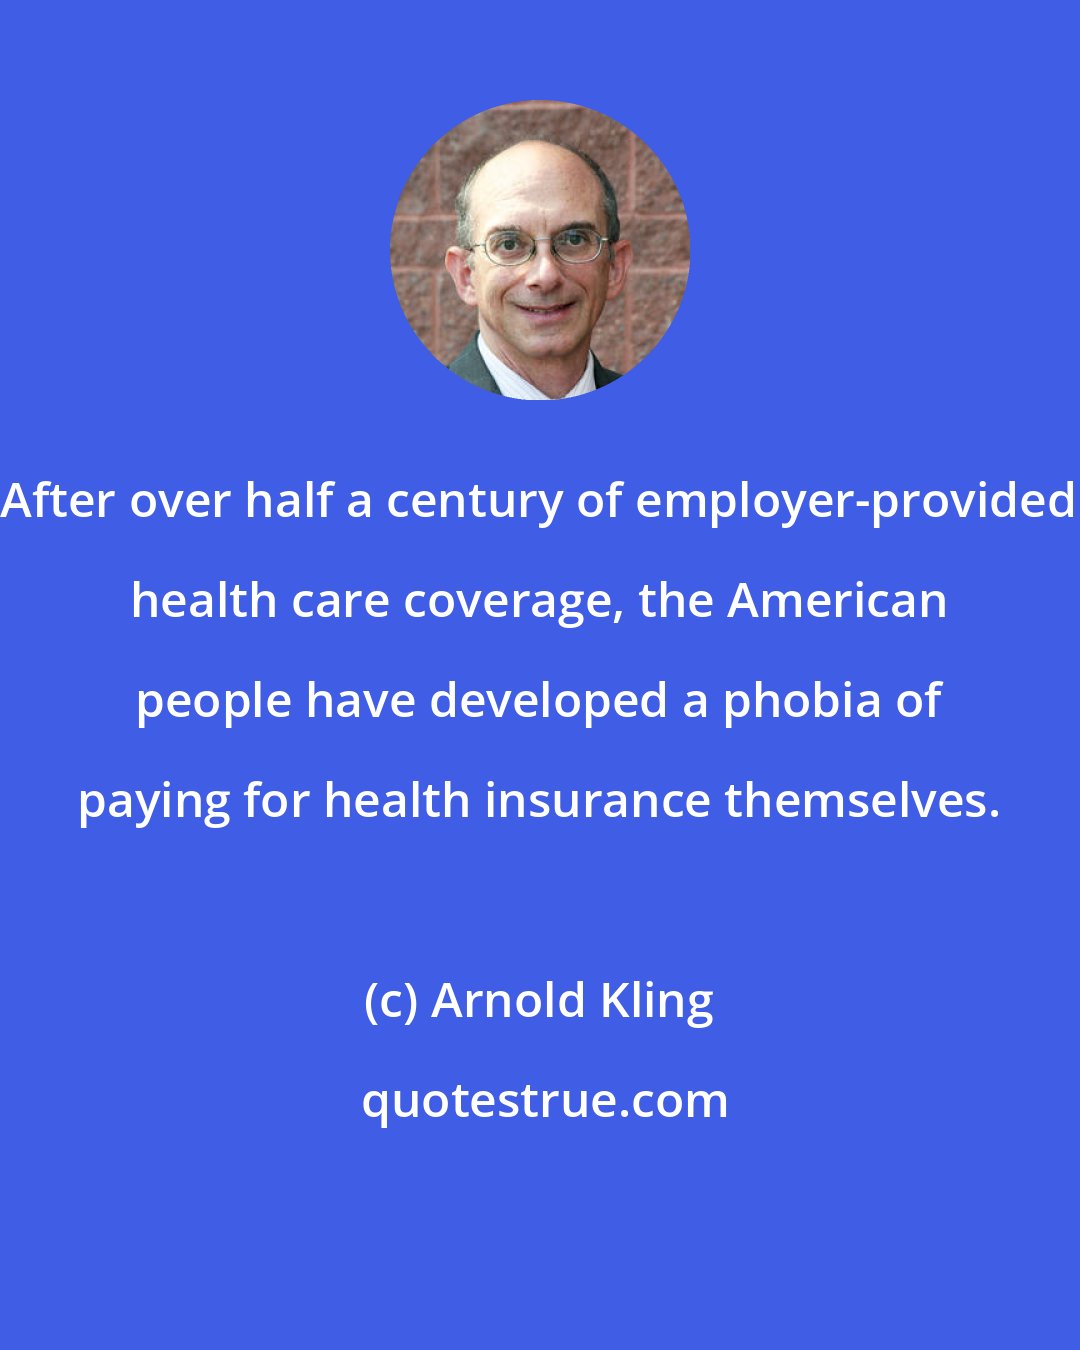 Arnold Kling: After over half a century of employer-provided health care coverage, the American people have developed a phobia of paying for health insurance themselves.